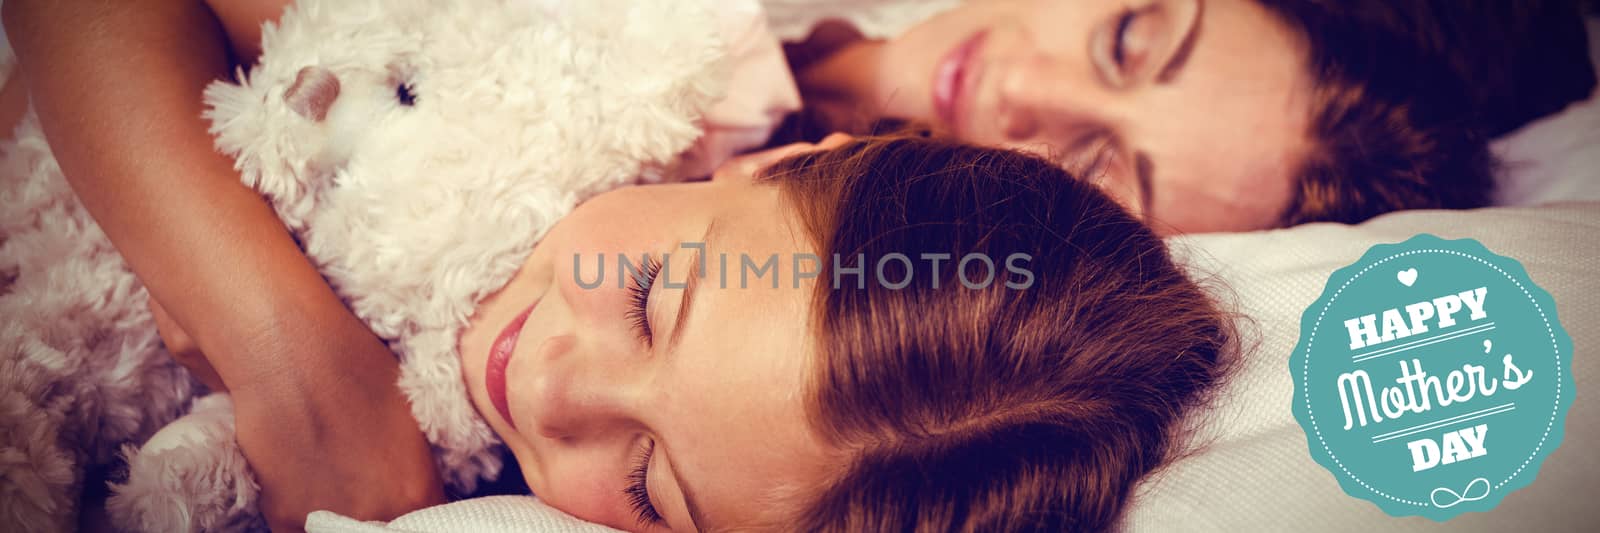 mothers day greeting against high angle view of family sleeping on bed